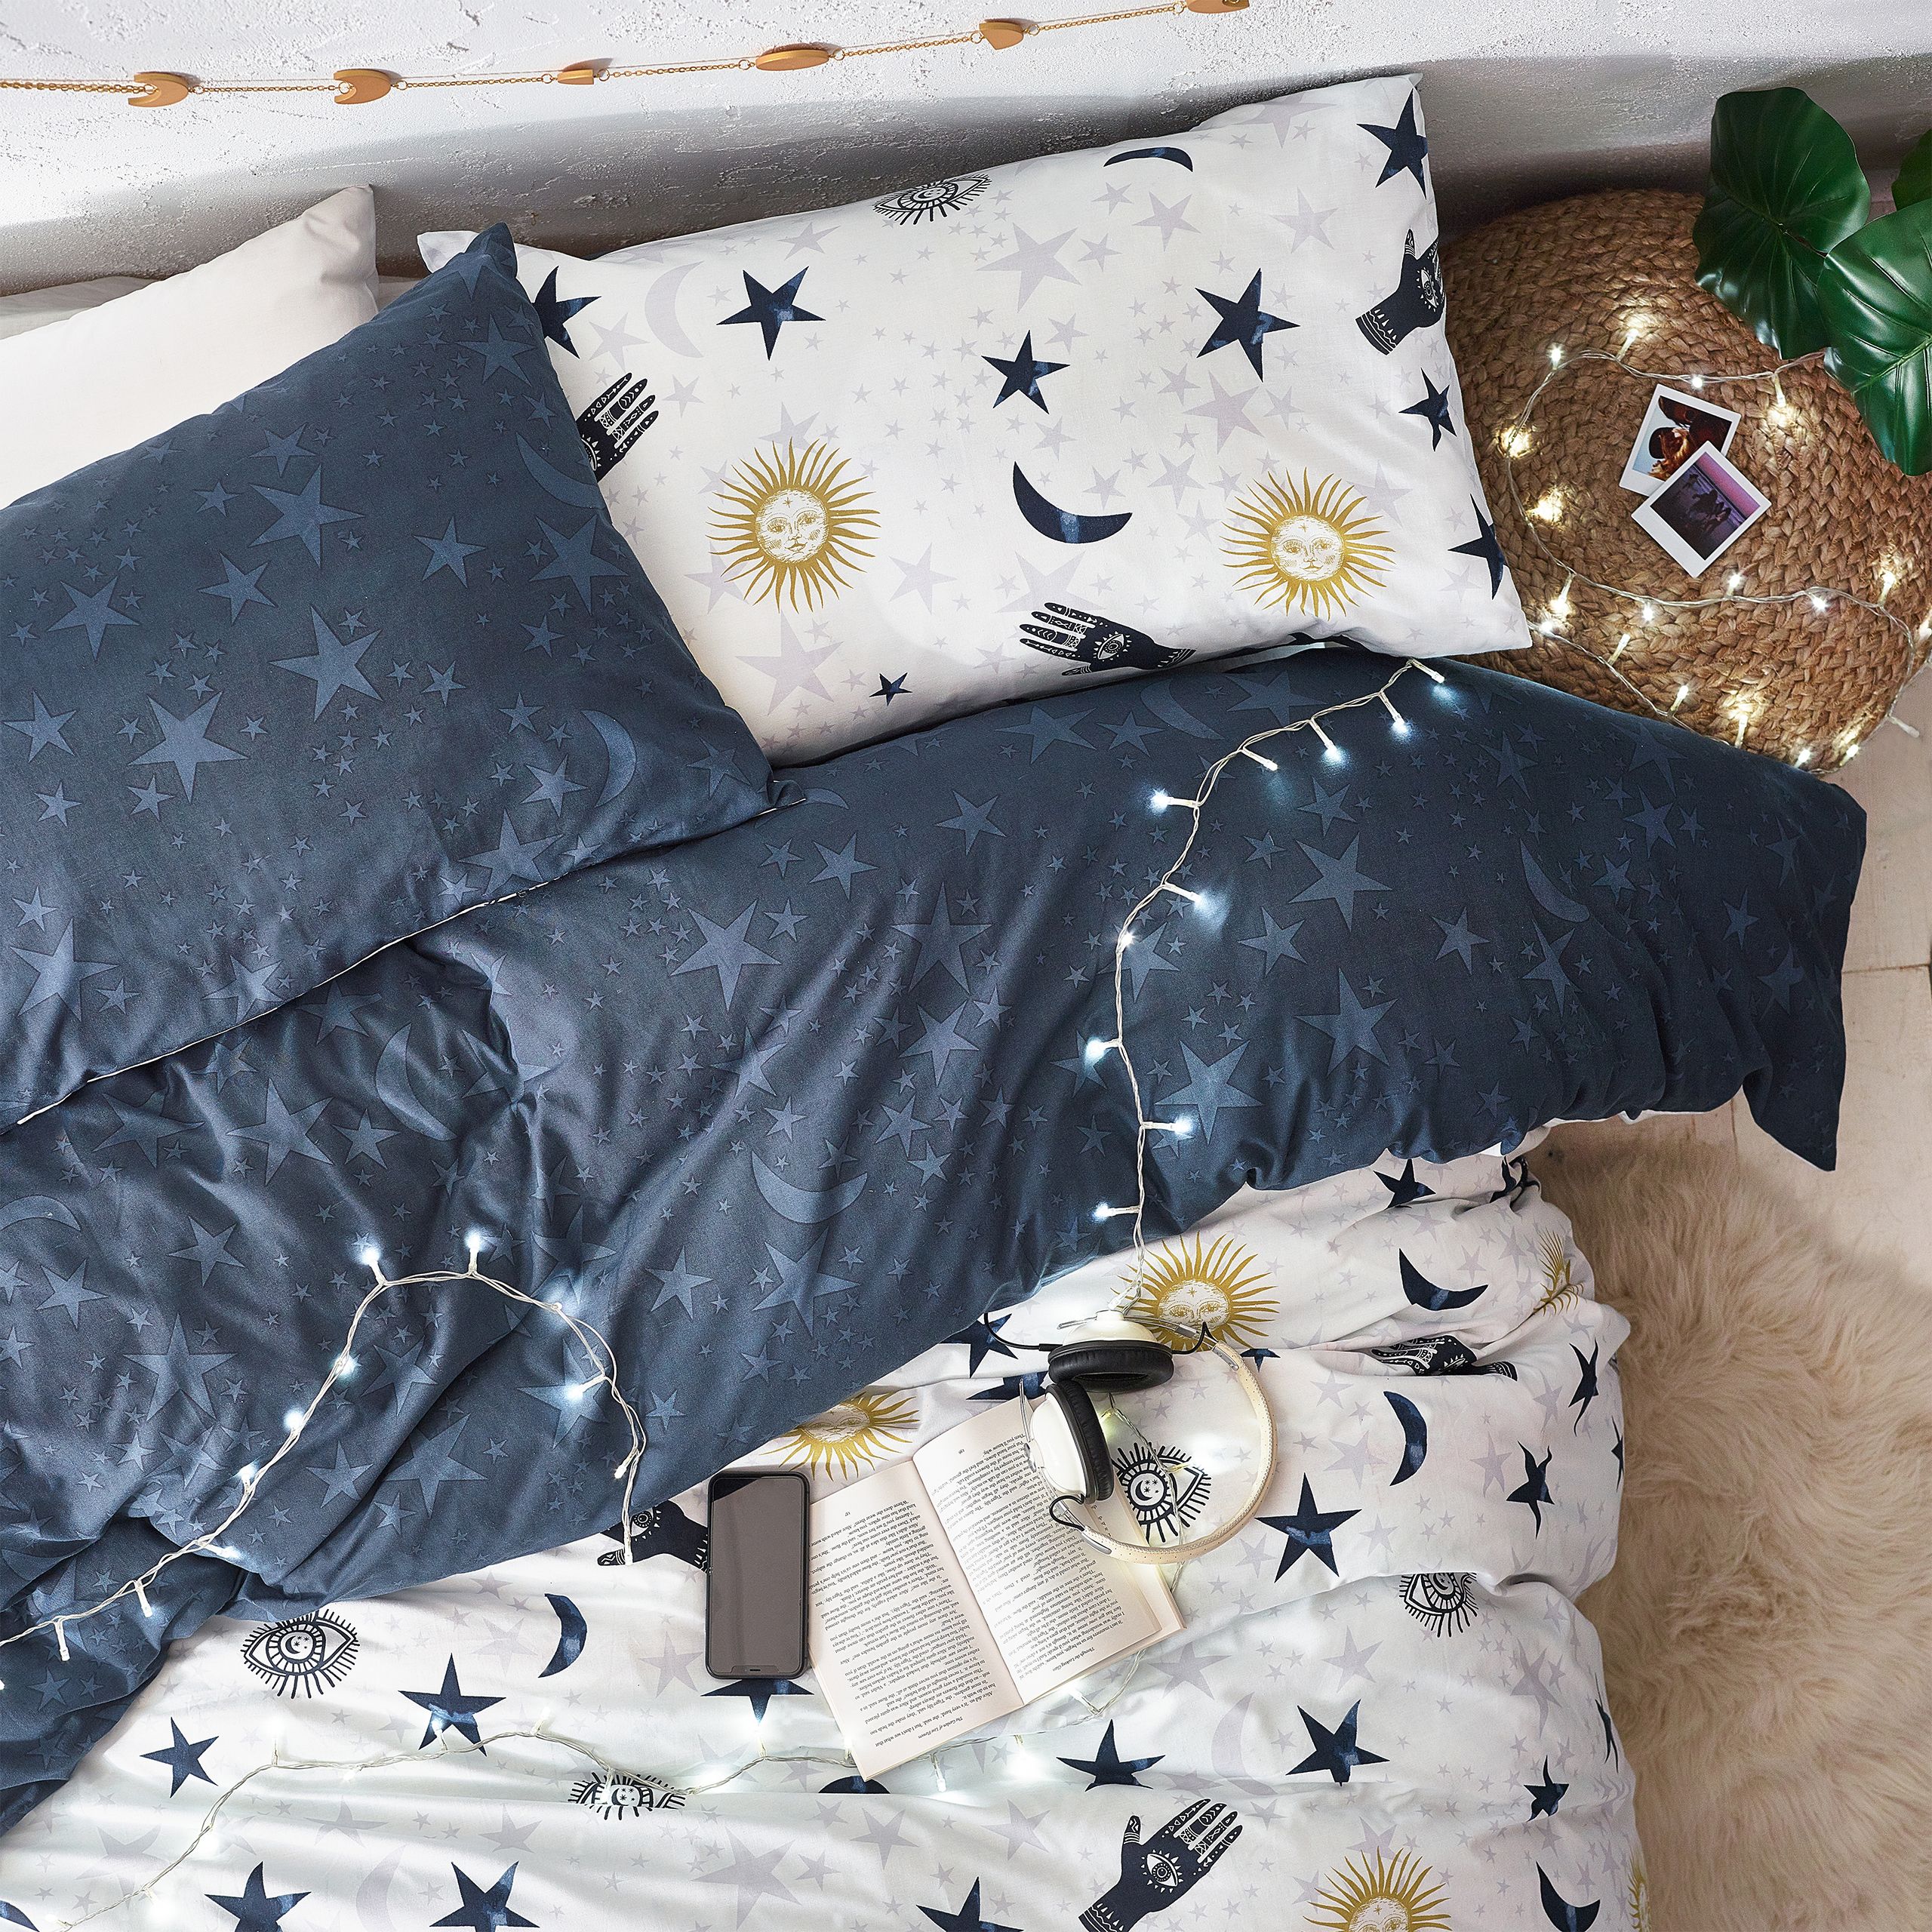 Make your bedroom mystical with this Stargazer duvet set. Featuring a galaxy of suns, moons and stars surrounded by mystical eyes and zodiacs constellations. The magic continues to the reverse with a complimenting design of twinkling stars on a darker base so you can switch the look when you need to.